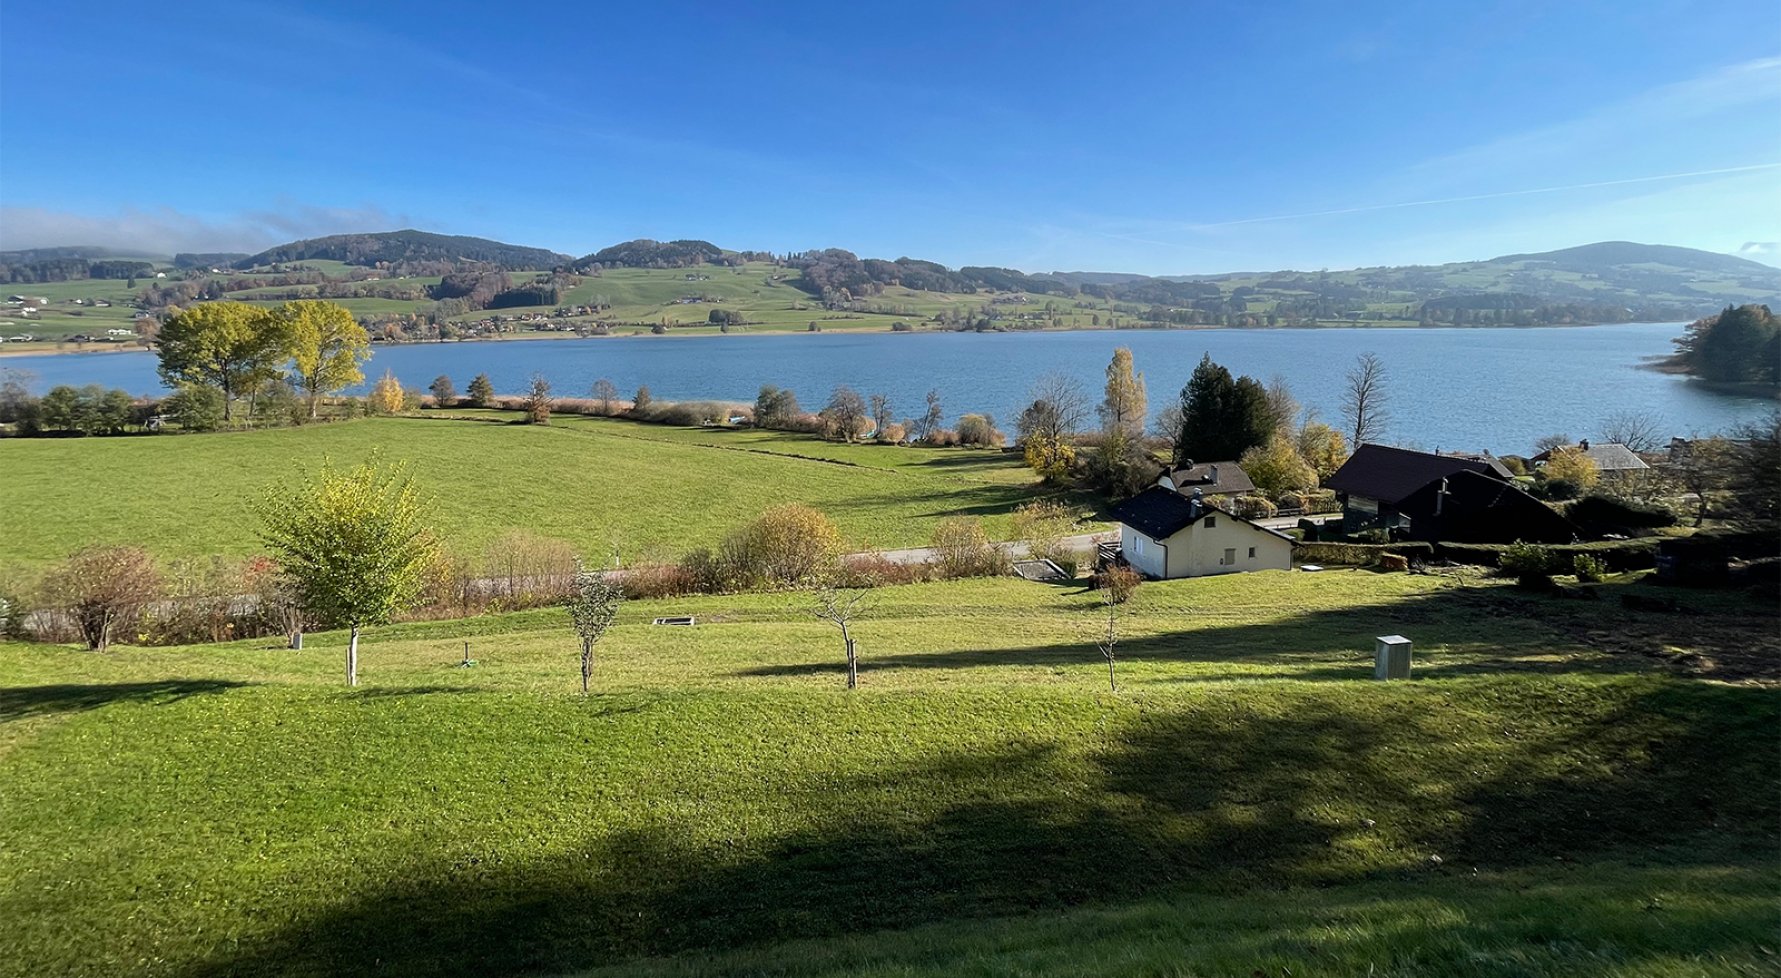 Property in 4894 Irrsee / Salzkammergut: Country house with an unobstructable panoramic view overlooking Lake Irrsee - picture 1